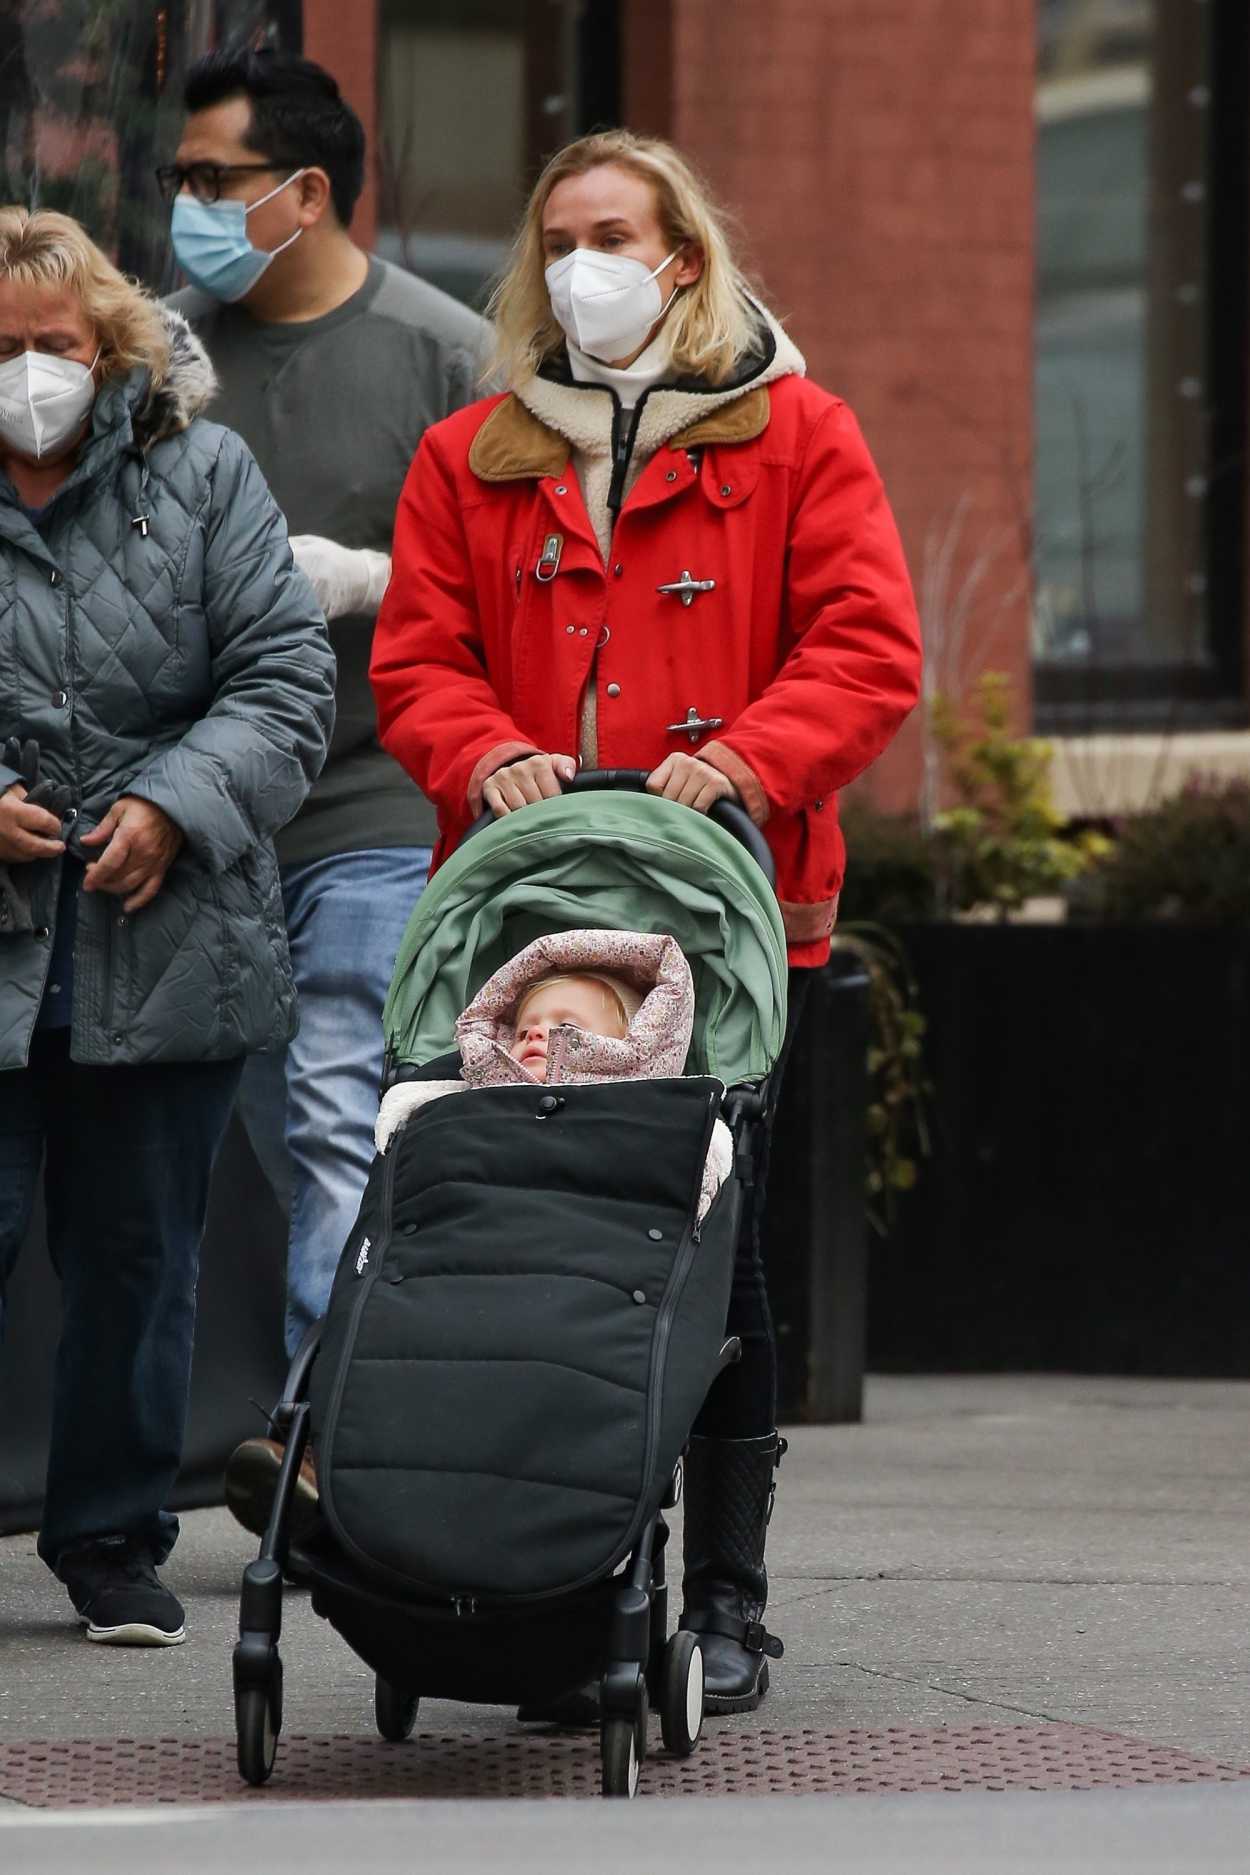 Diane Kruger in a Red Jacket Was Seen Out on a Stroll with Her Mother ...